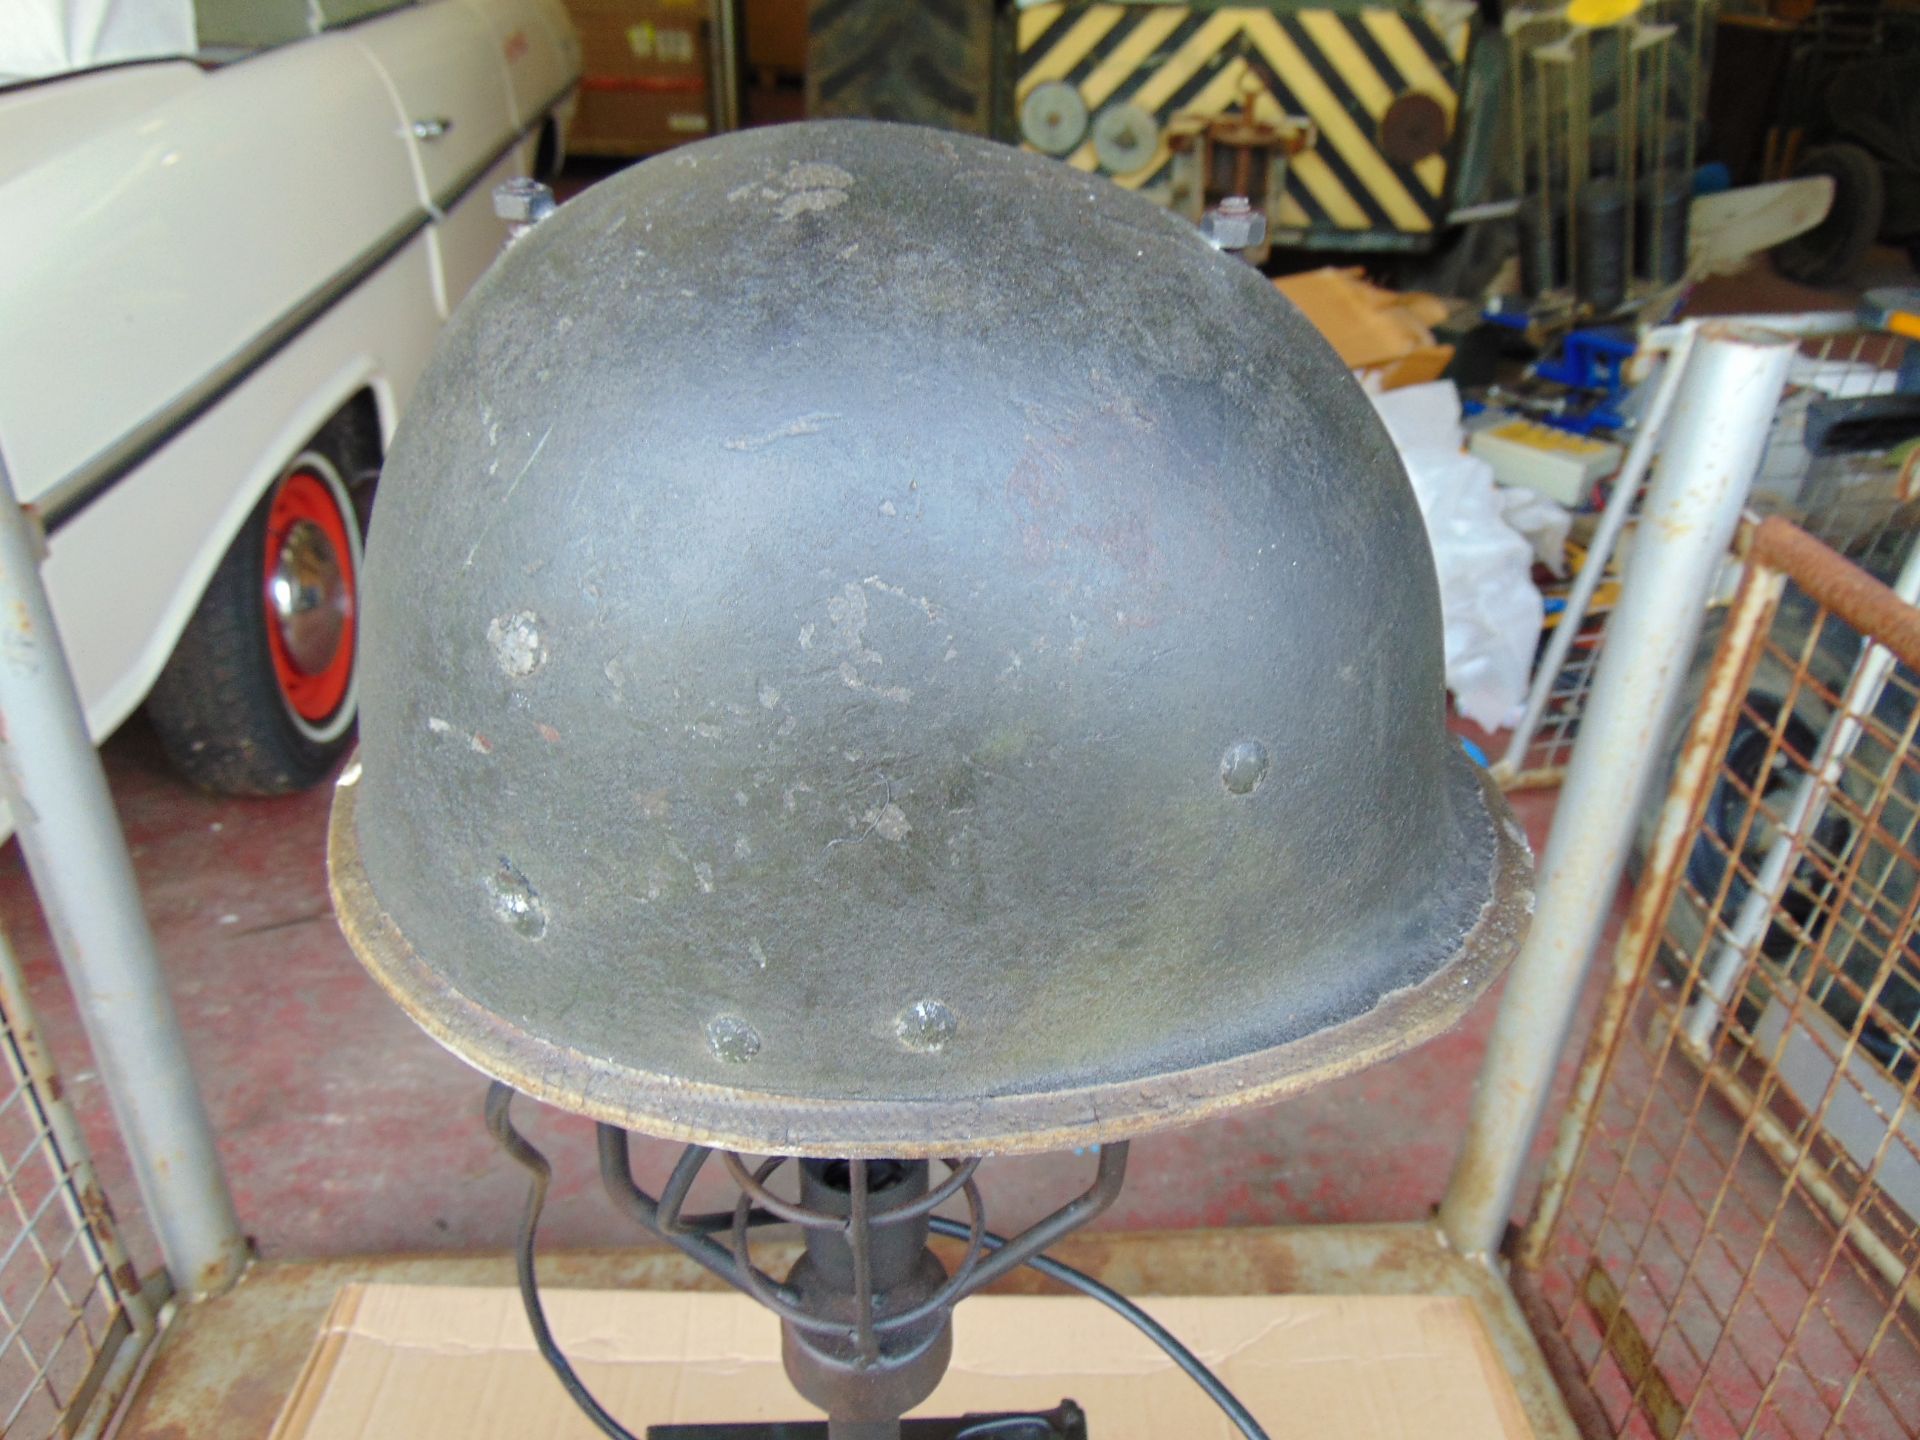 Very Unusual Military Table Lamp Made from Combat Helmet and 50 Cal Ammo Box - Image 2 of 8